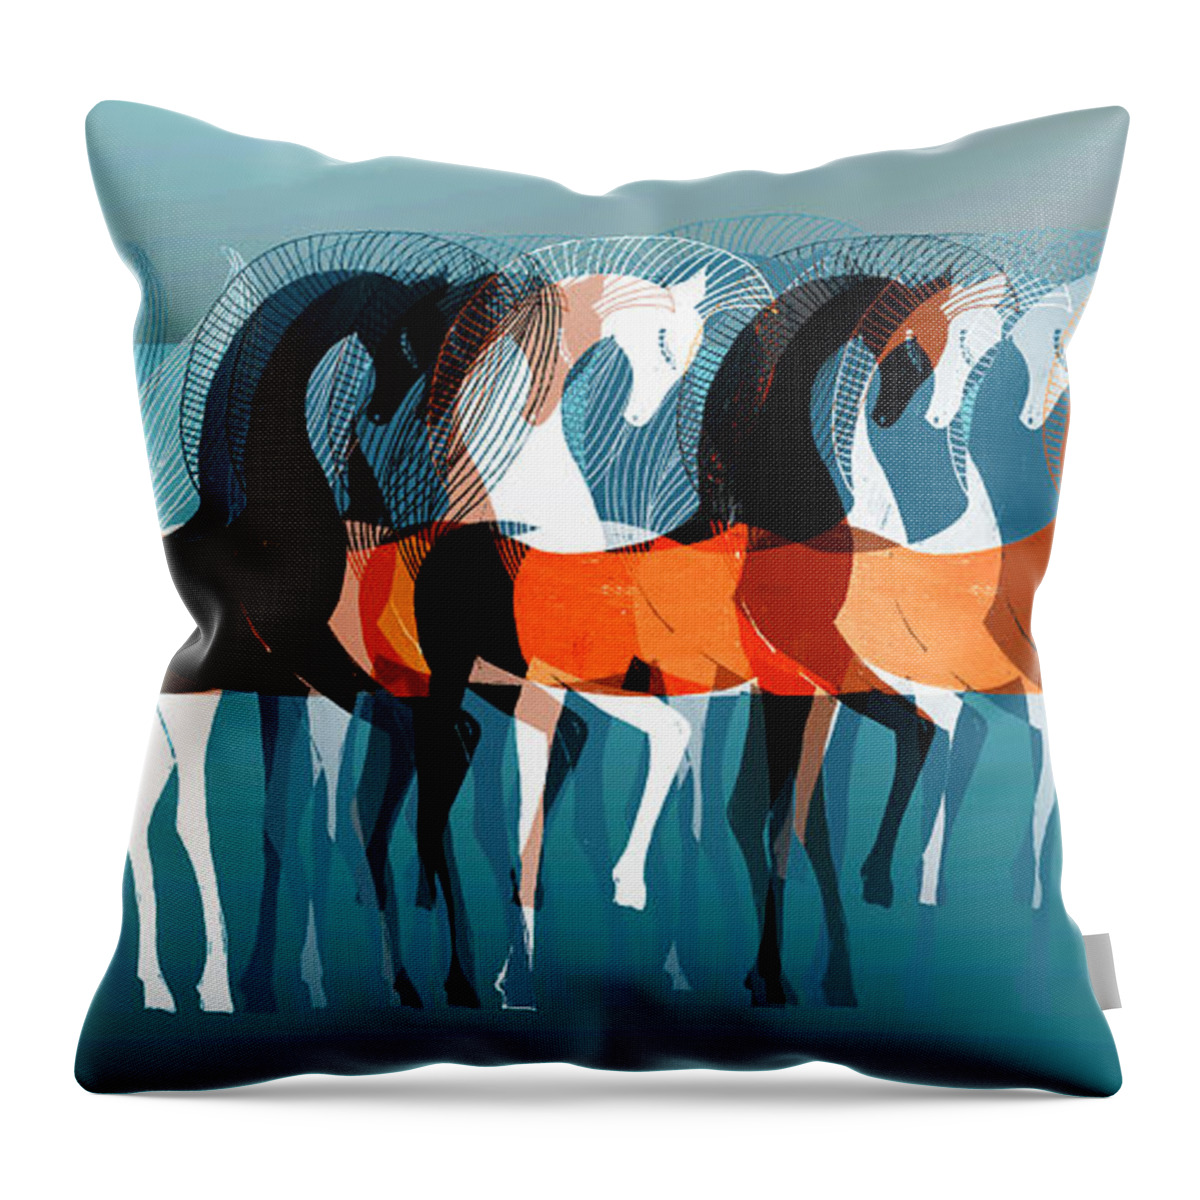 Abstract Throw Pillow featuring the digital art On Parade by Stephanie Grant